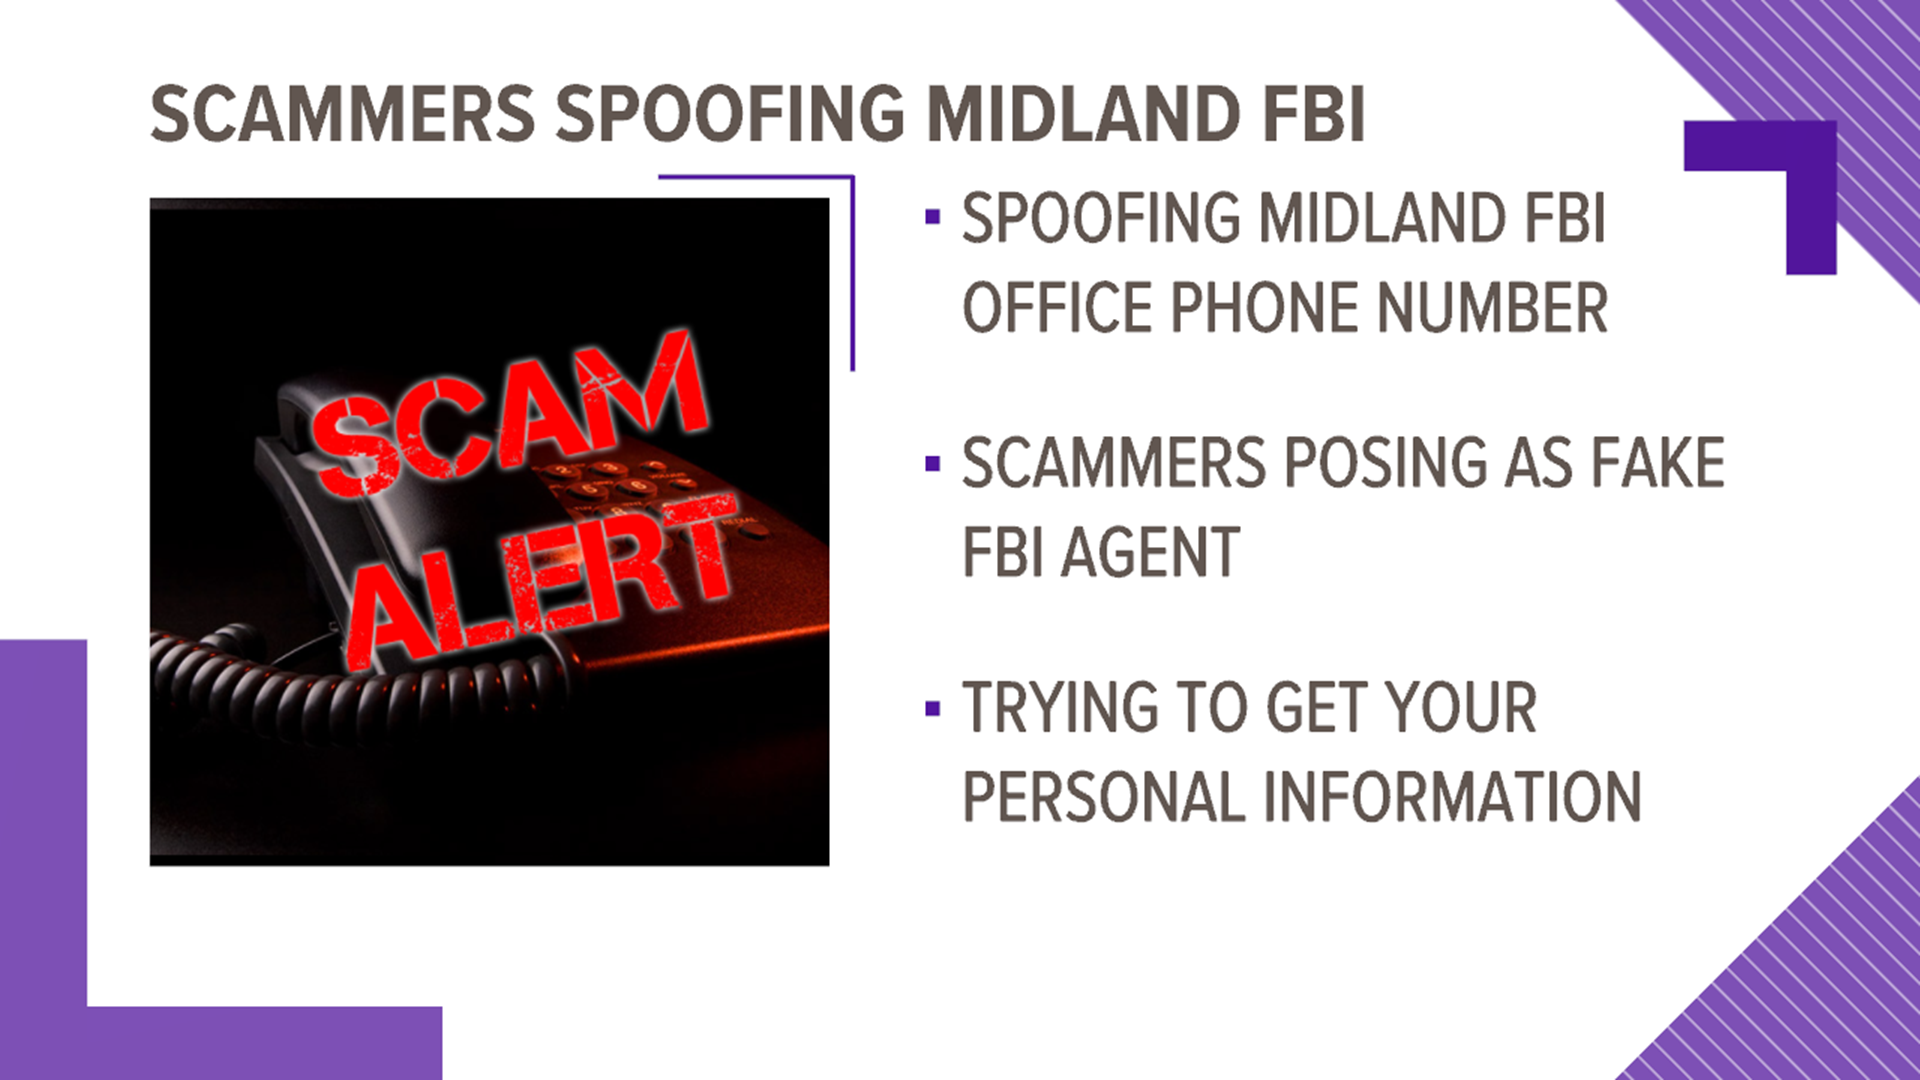 Scammers are trying to obtain personal information, banking info and social security numbers.